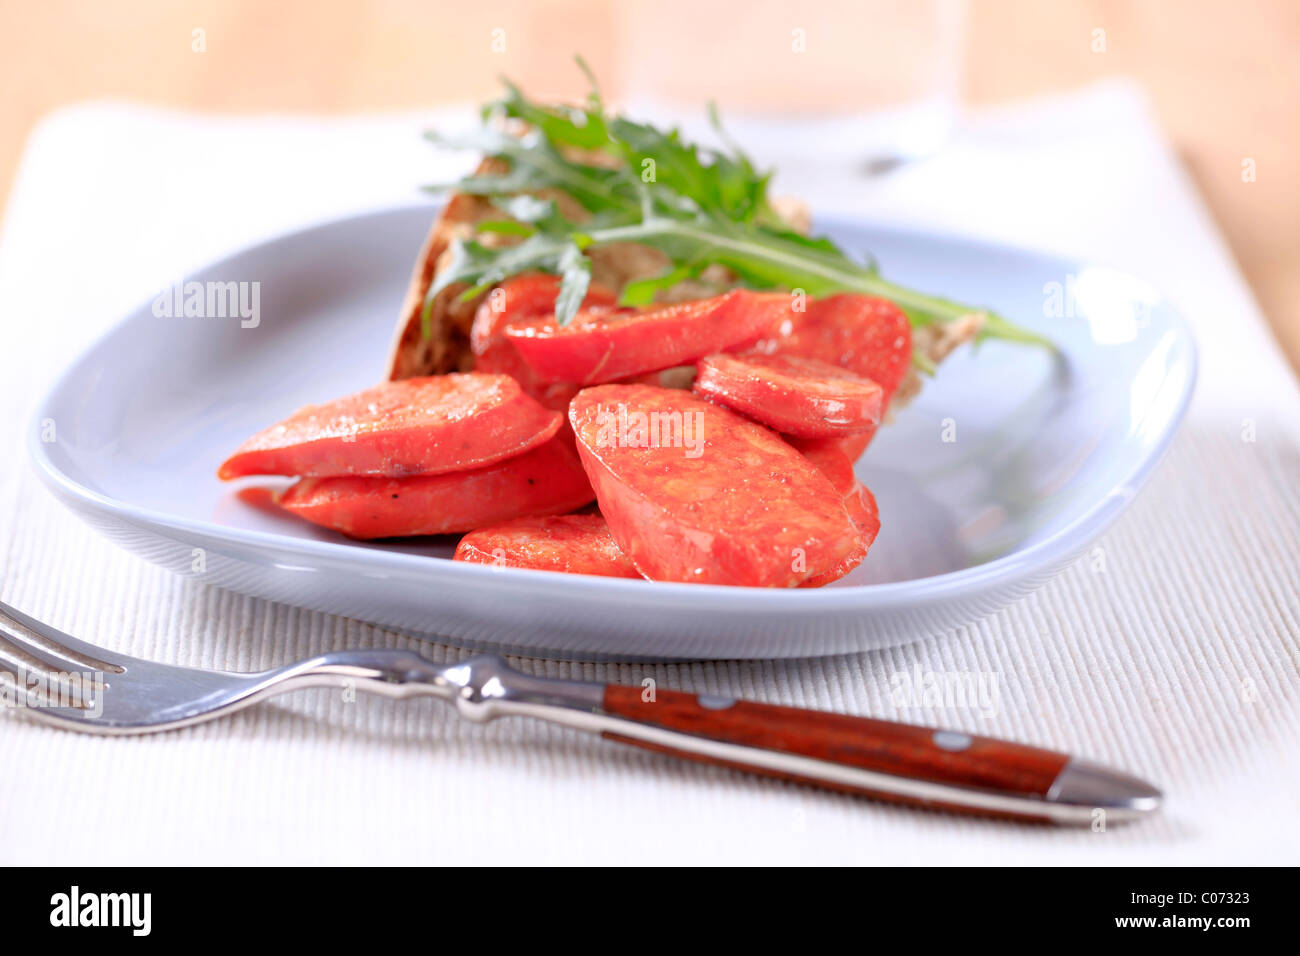 Slices of grilled sausage and brown bread Stock Photo